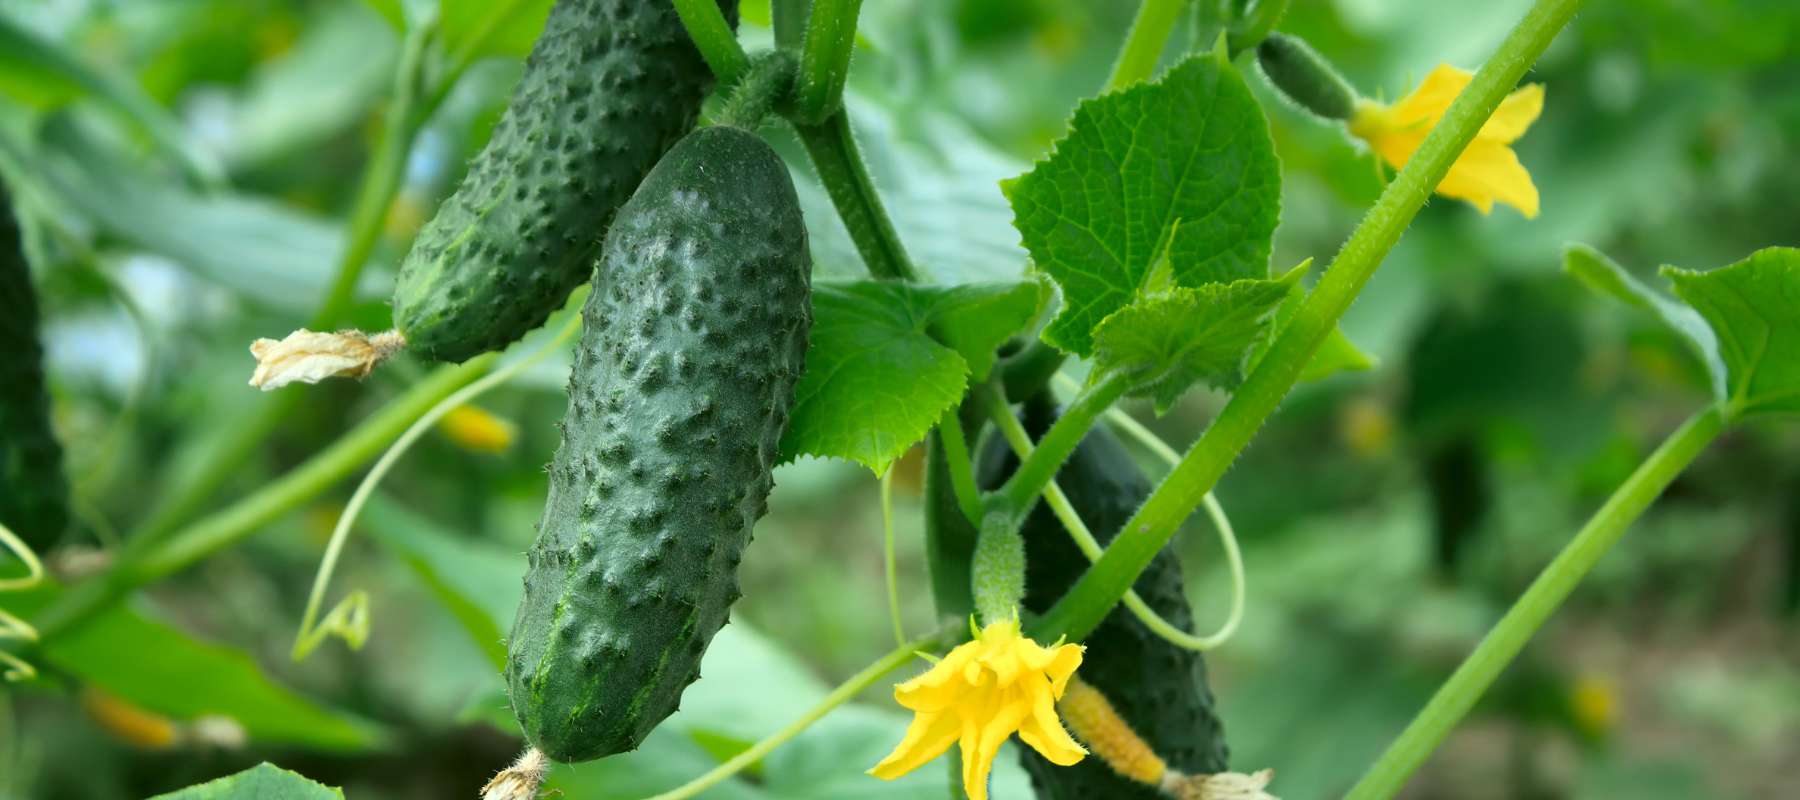 Growing Cucumbers from Seed to Harvest